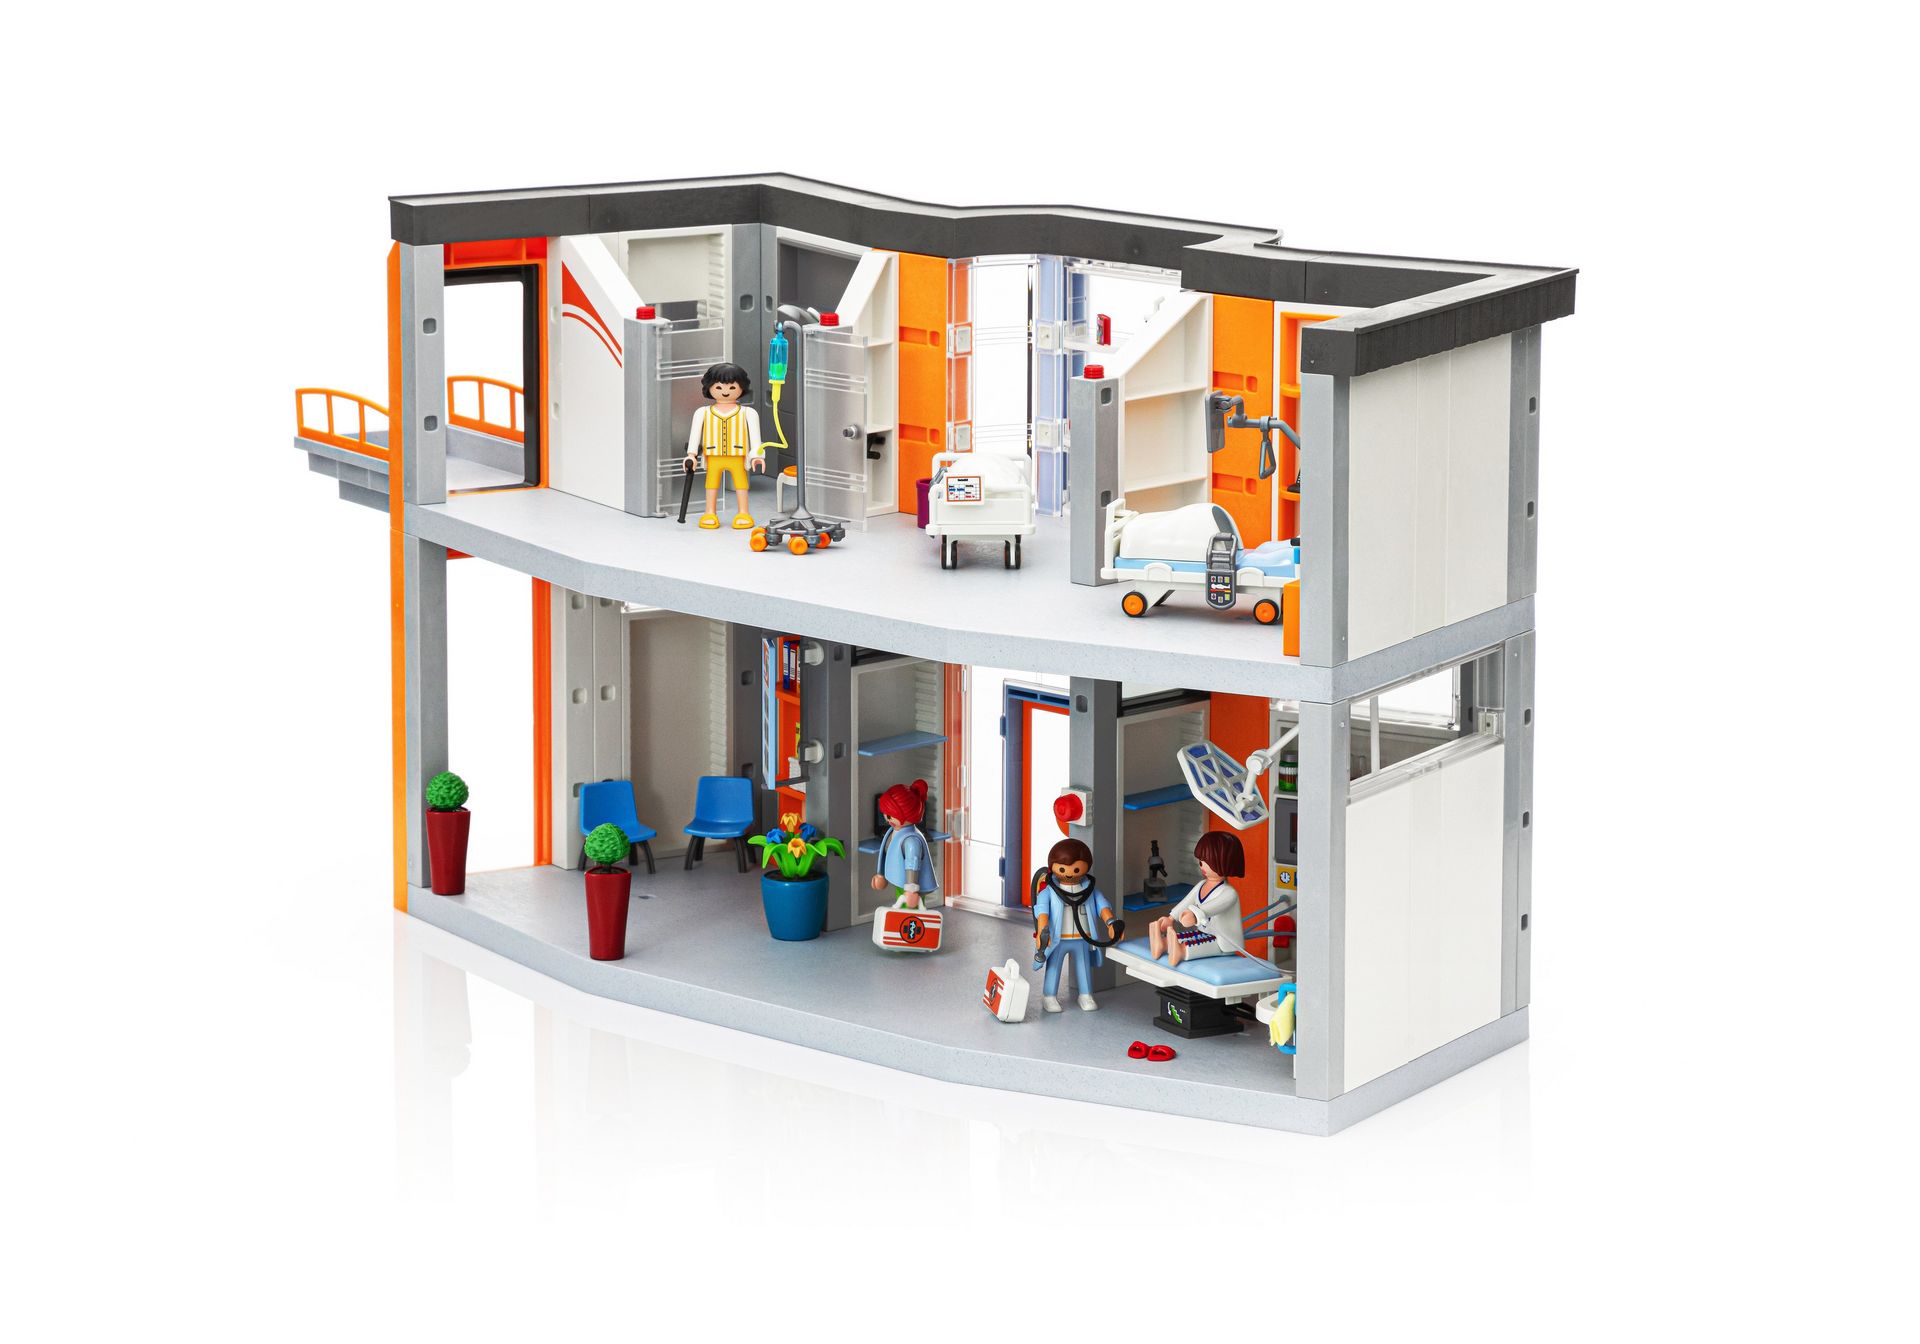 Playmobil @ @ @ @ furniture chair @ @ @ @ home bench 1900 @ hospital @ hotel @ a 10 